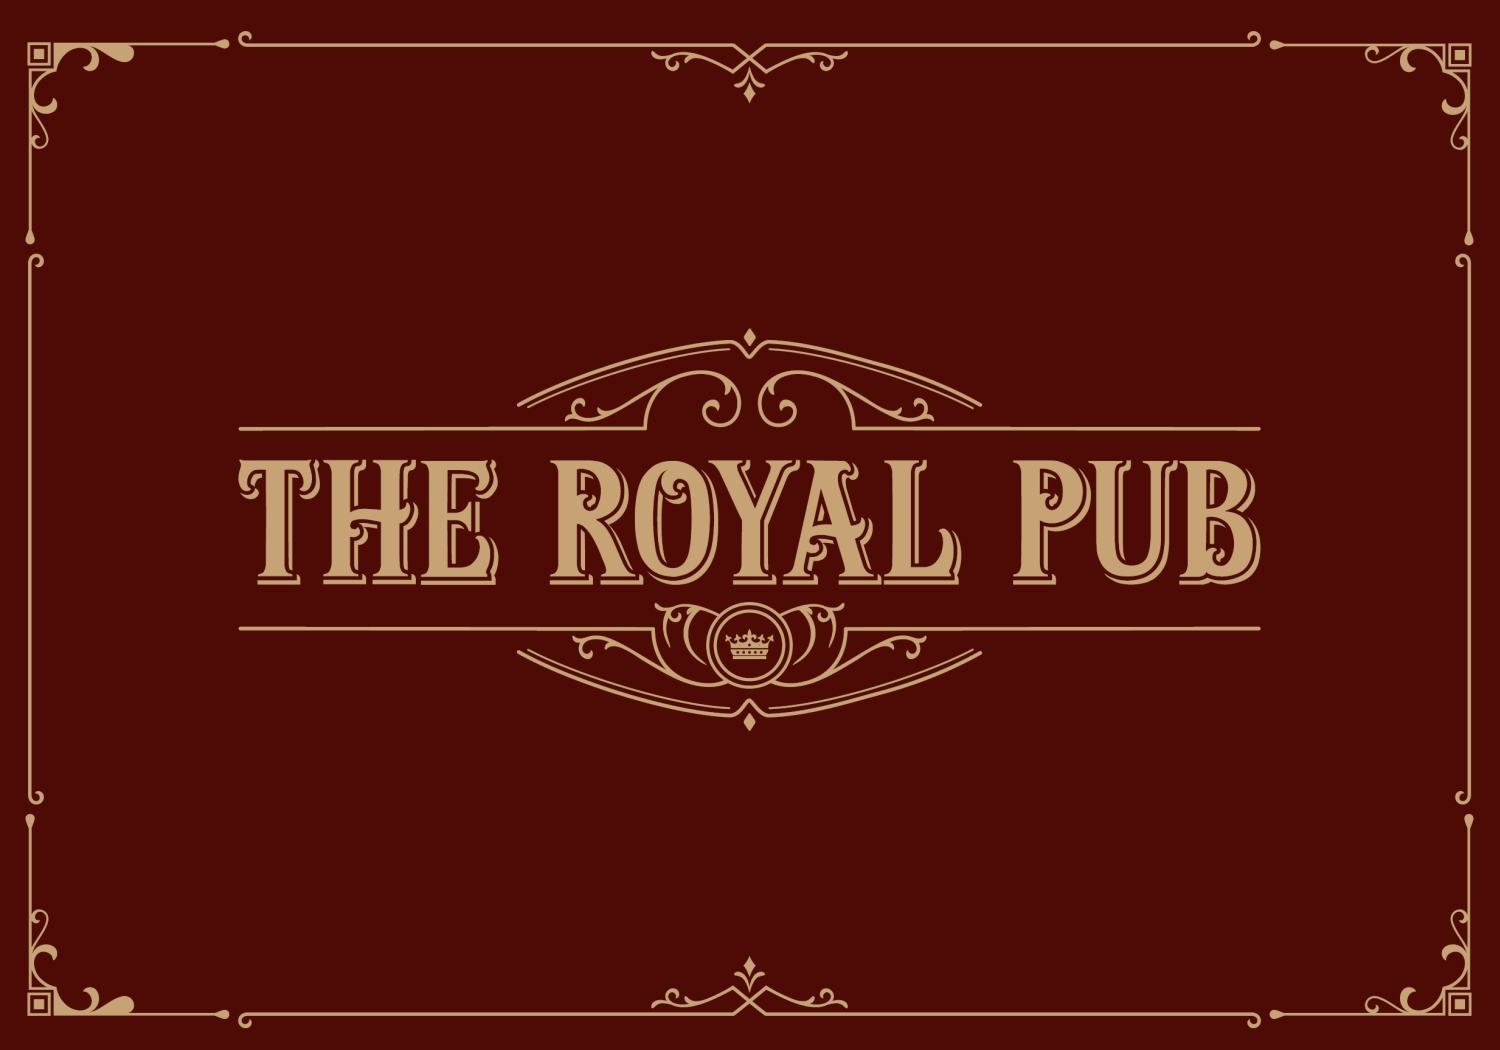 THE ROYAL PUB, AN ENGLISH PUB INSPIRED RESTAURANT, IS COMING TO DISNEYLAND PARIS DISNEY VILLAGE FEBRUARY IN 2023